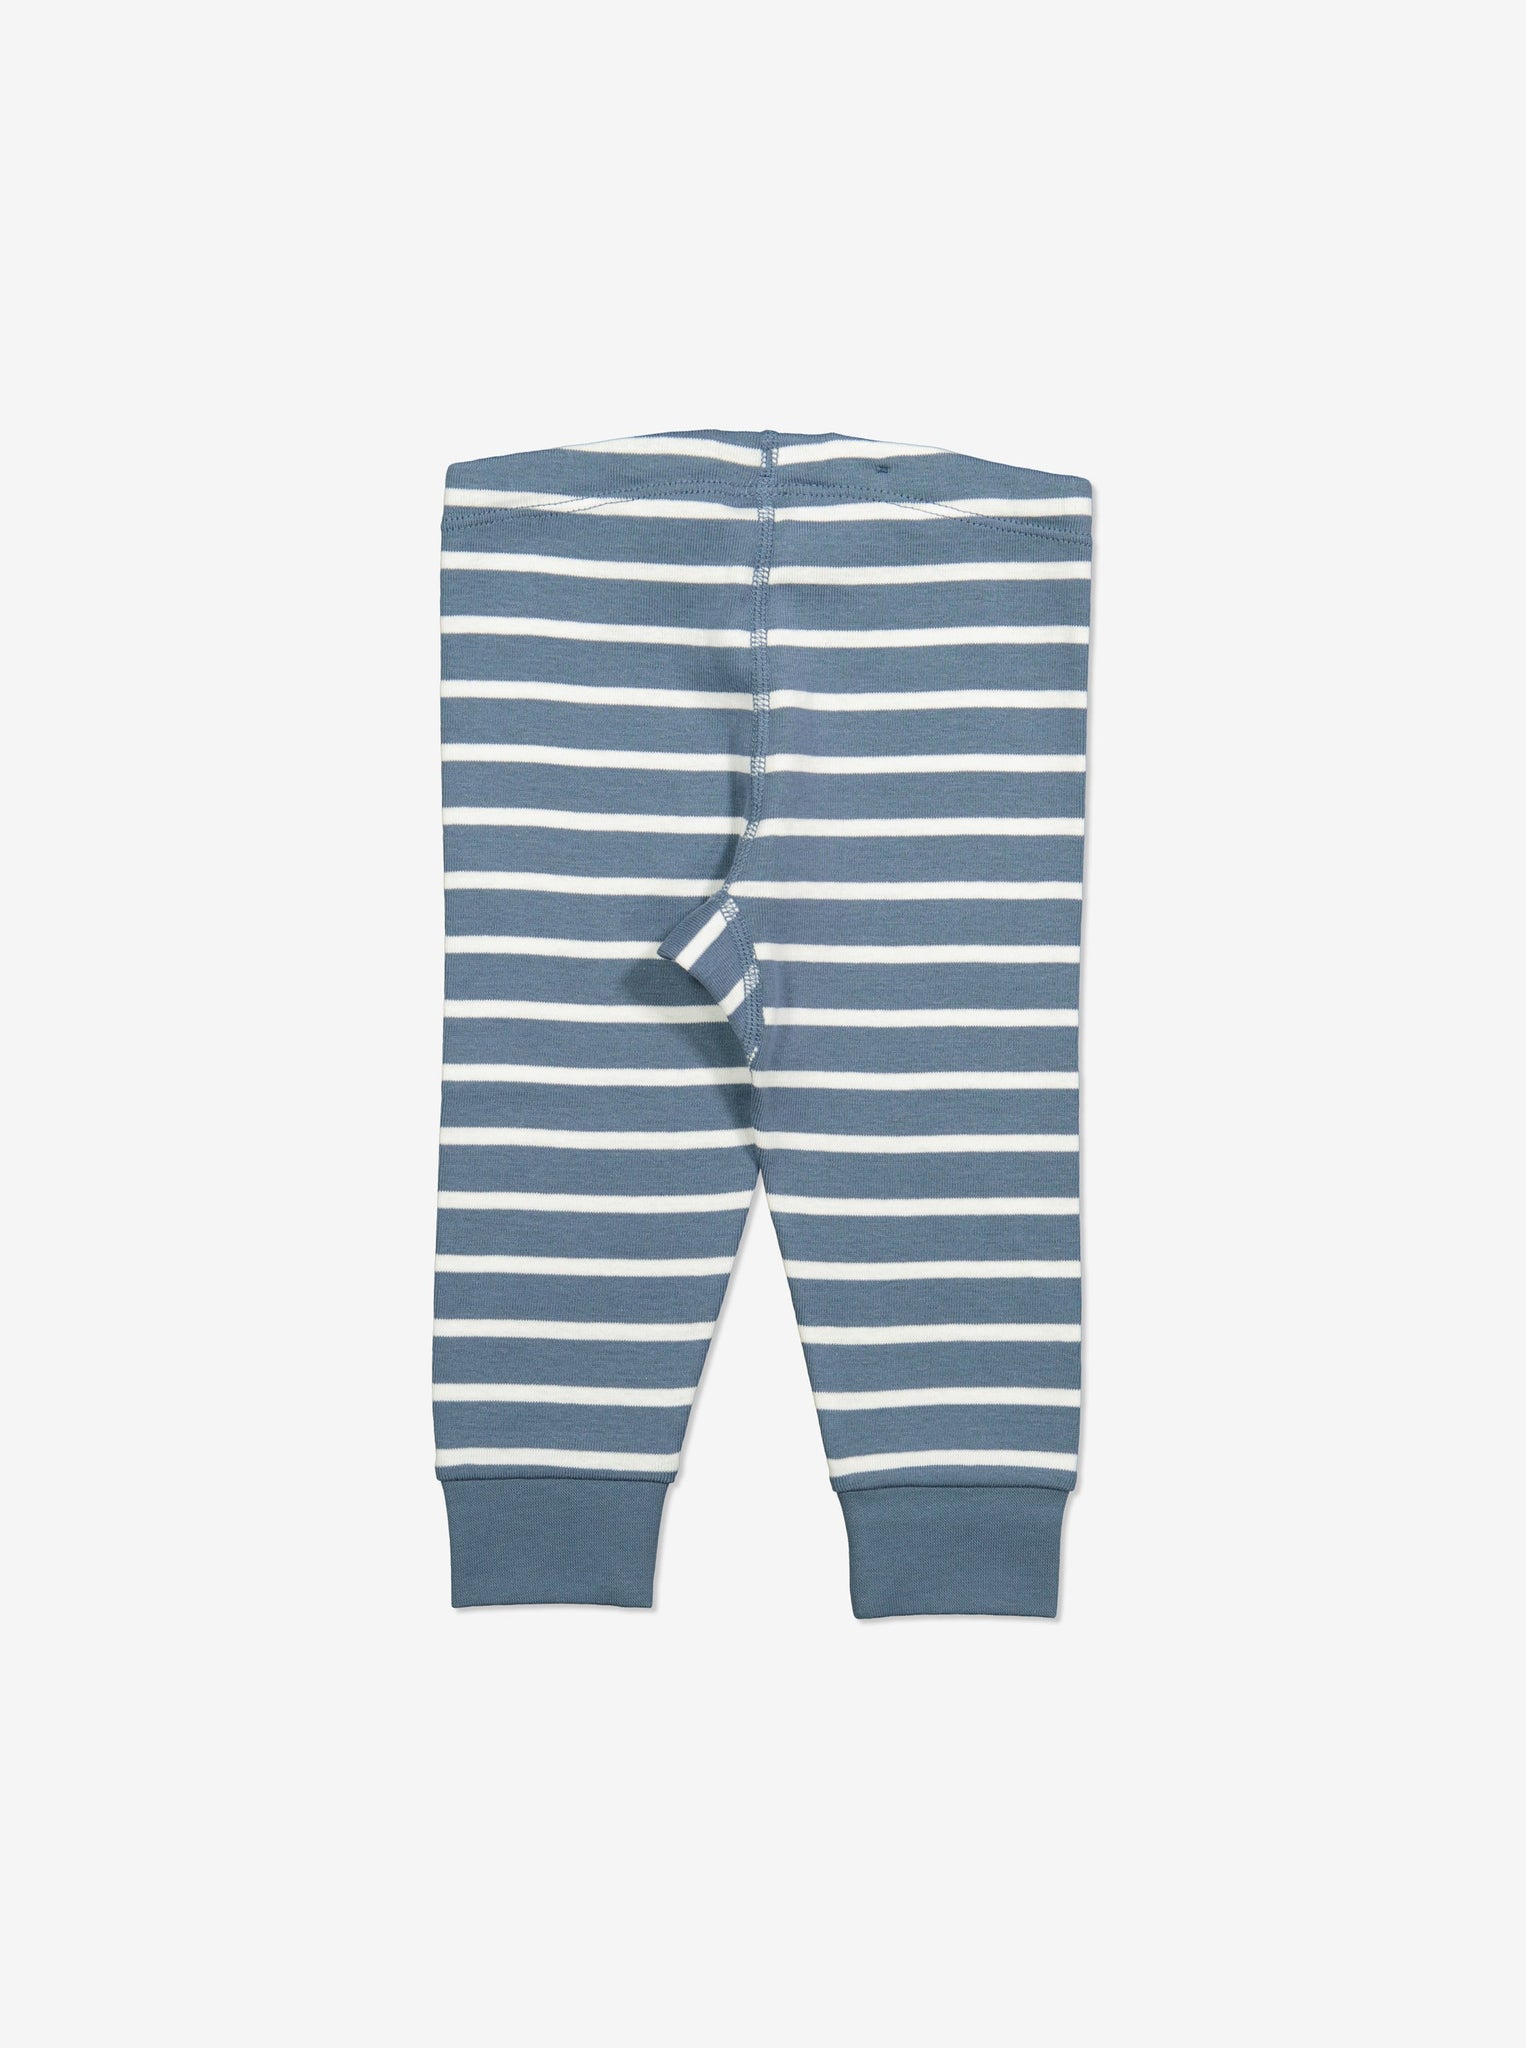  Organic Striped Blue Baby Leggings from Polarn O. Pyret Kidswear. Made with 100% organic cotton.